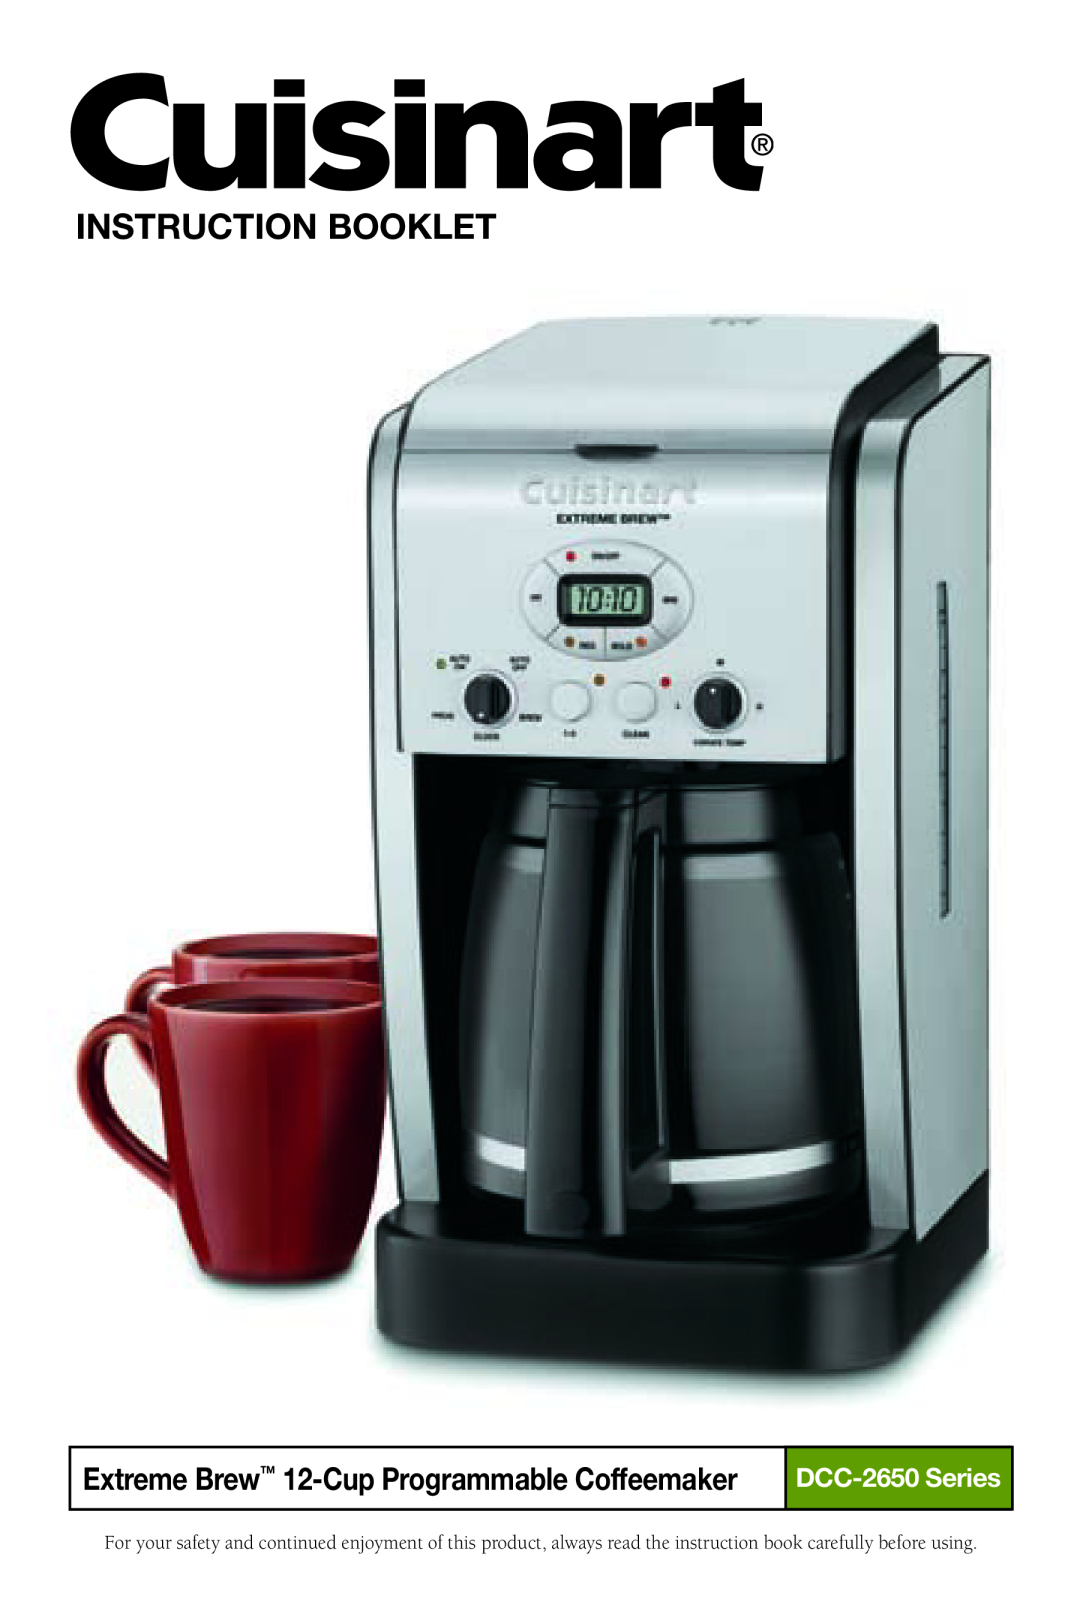 Cuisinart manual Instruction Booklet, Extreme Brew 12-Cup Programmable Coffeemaker, DCC-2650 Series 